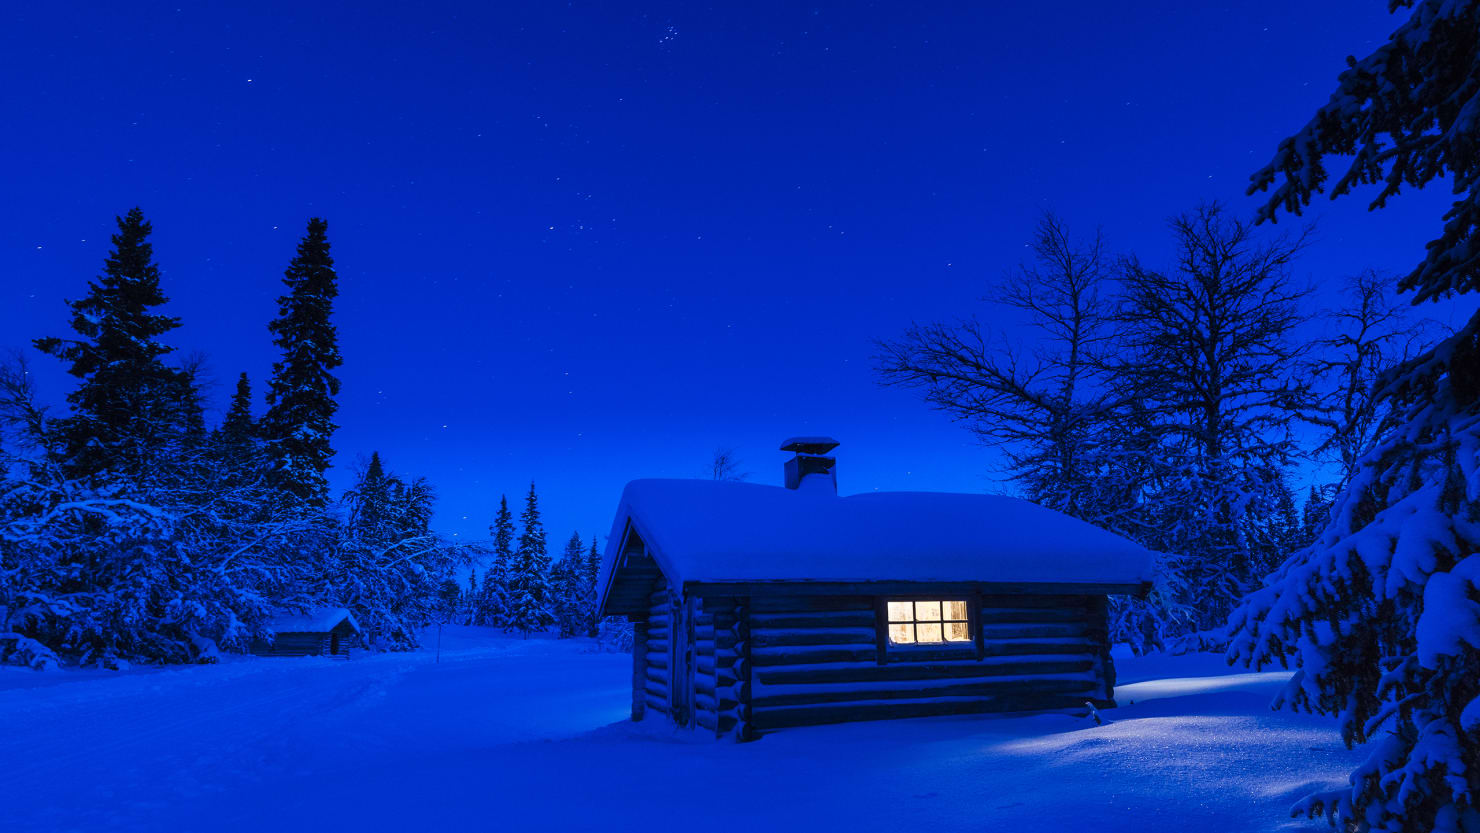 America’s Iconic Log Cabin Has a Dark and Dirty Side Too